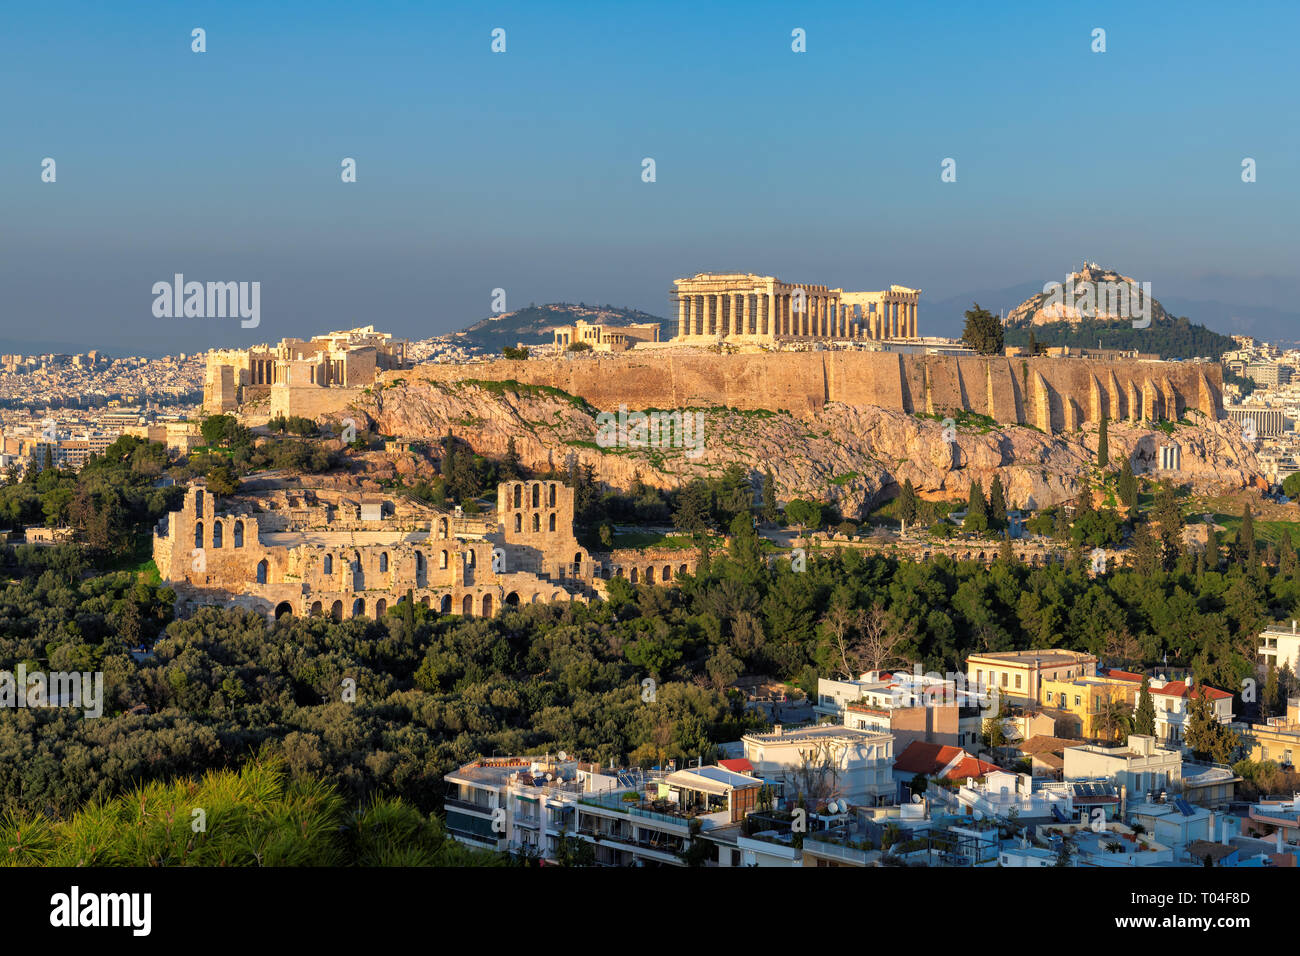 Acropolis of Athens at sunset, with the Parthenon Temple Stock Photo